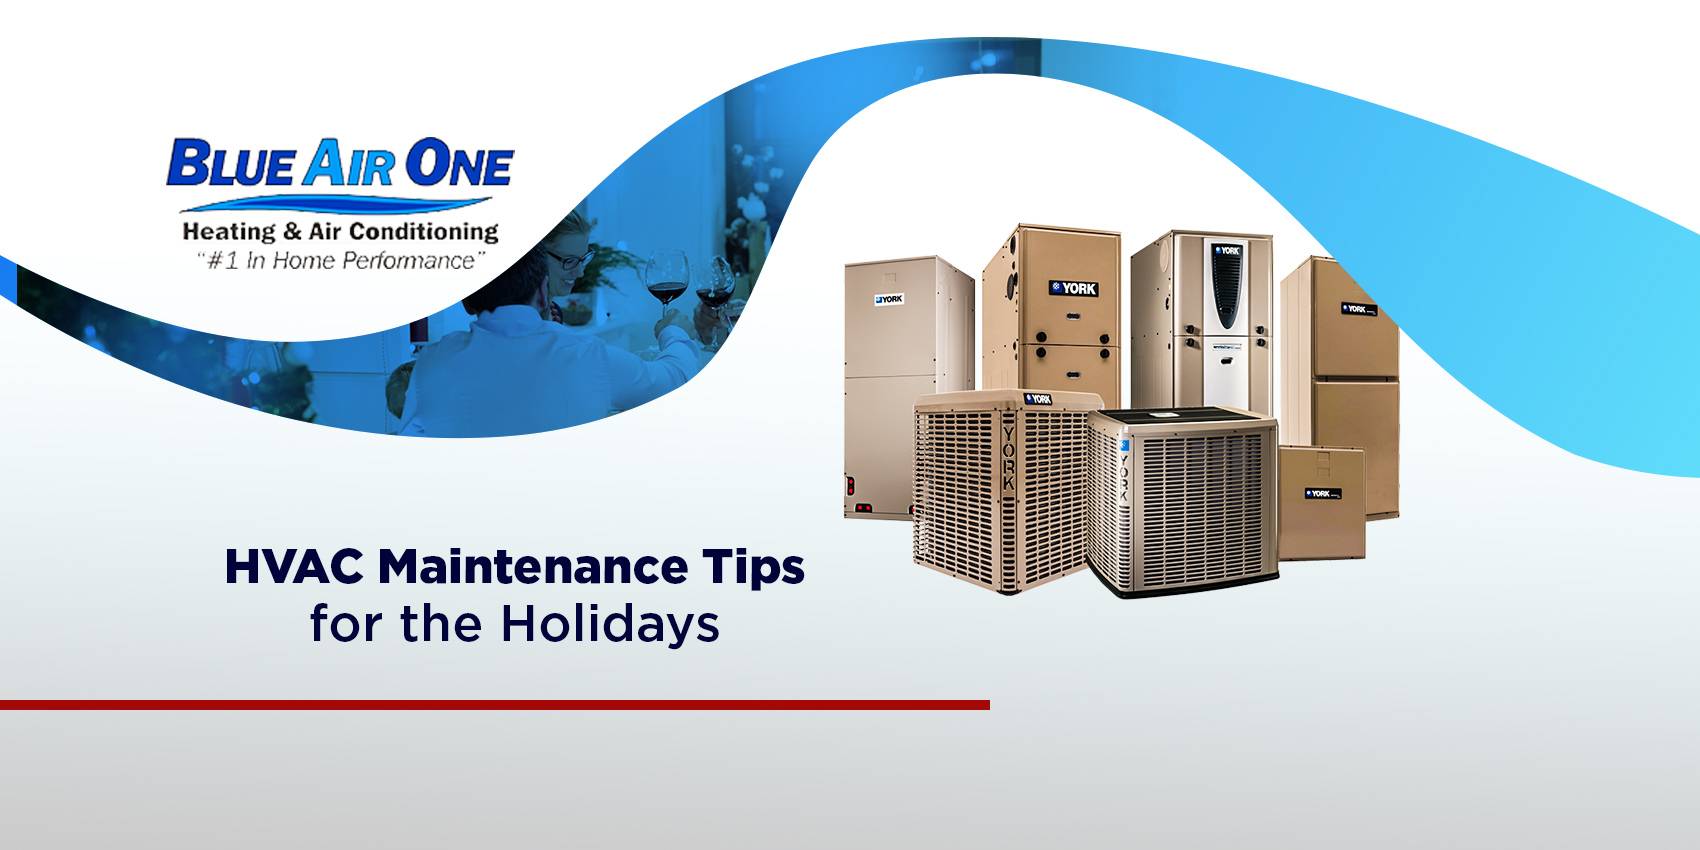 HVAC Maintenance Tips for the Holidays